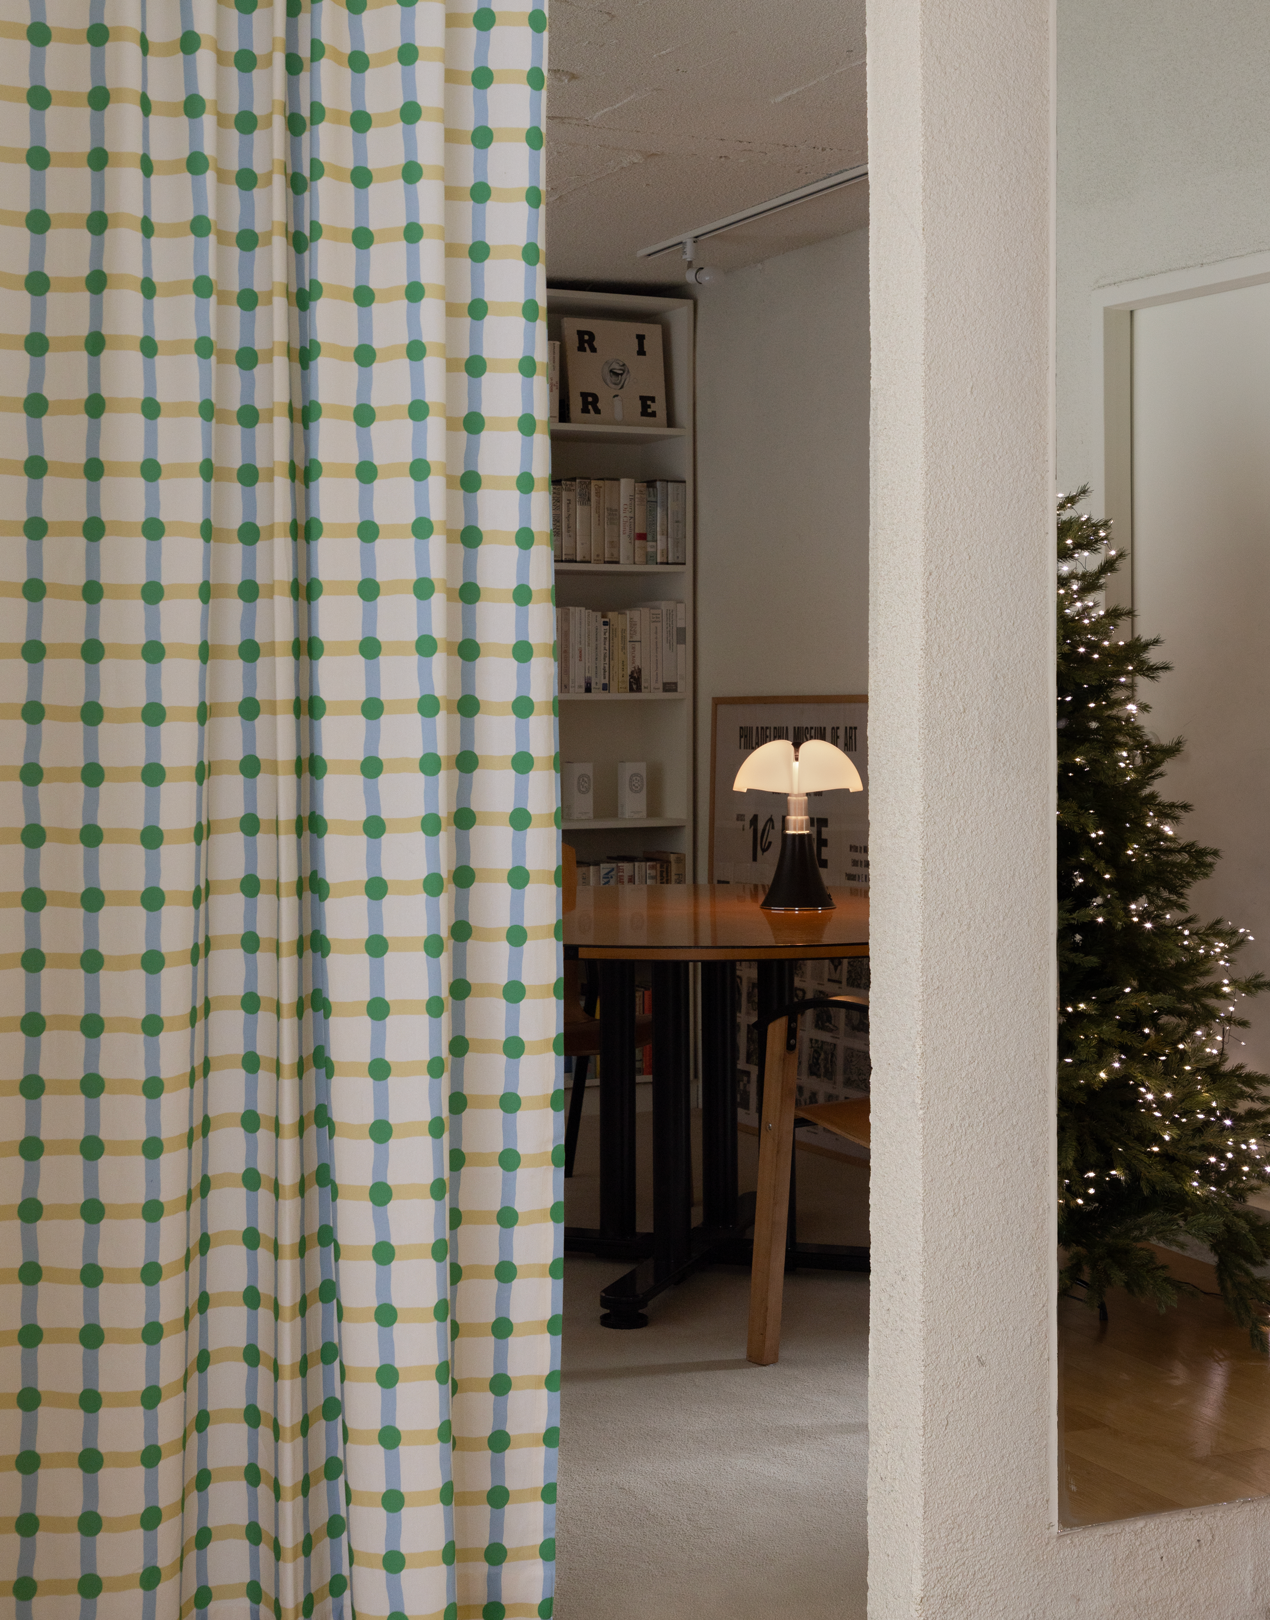 DOT CHECK CURTAIN - GREEN ON BEIGE